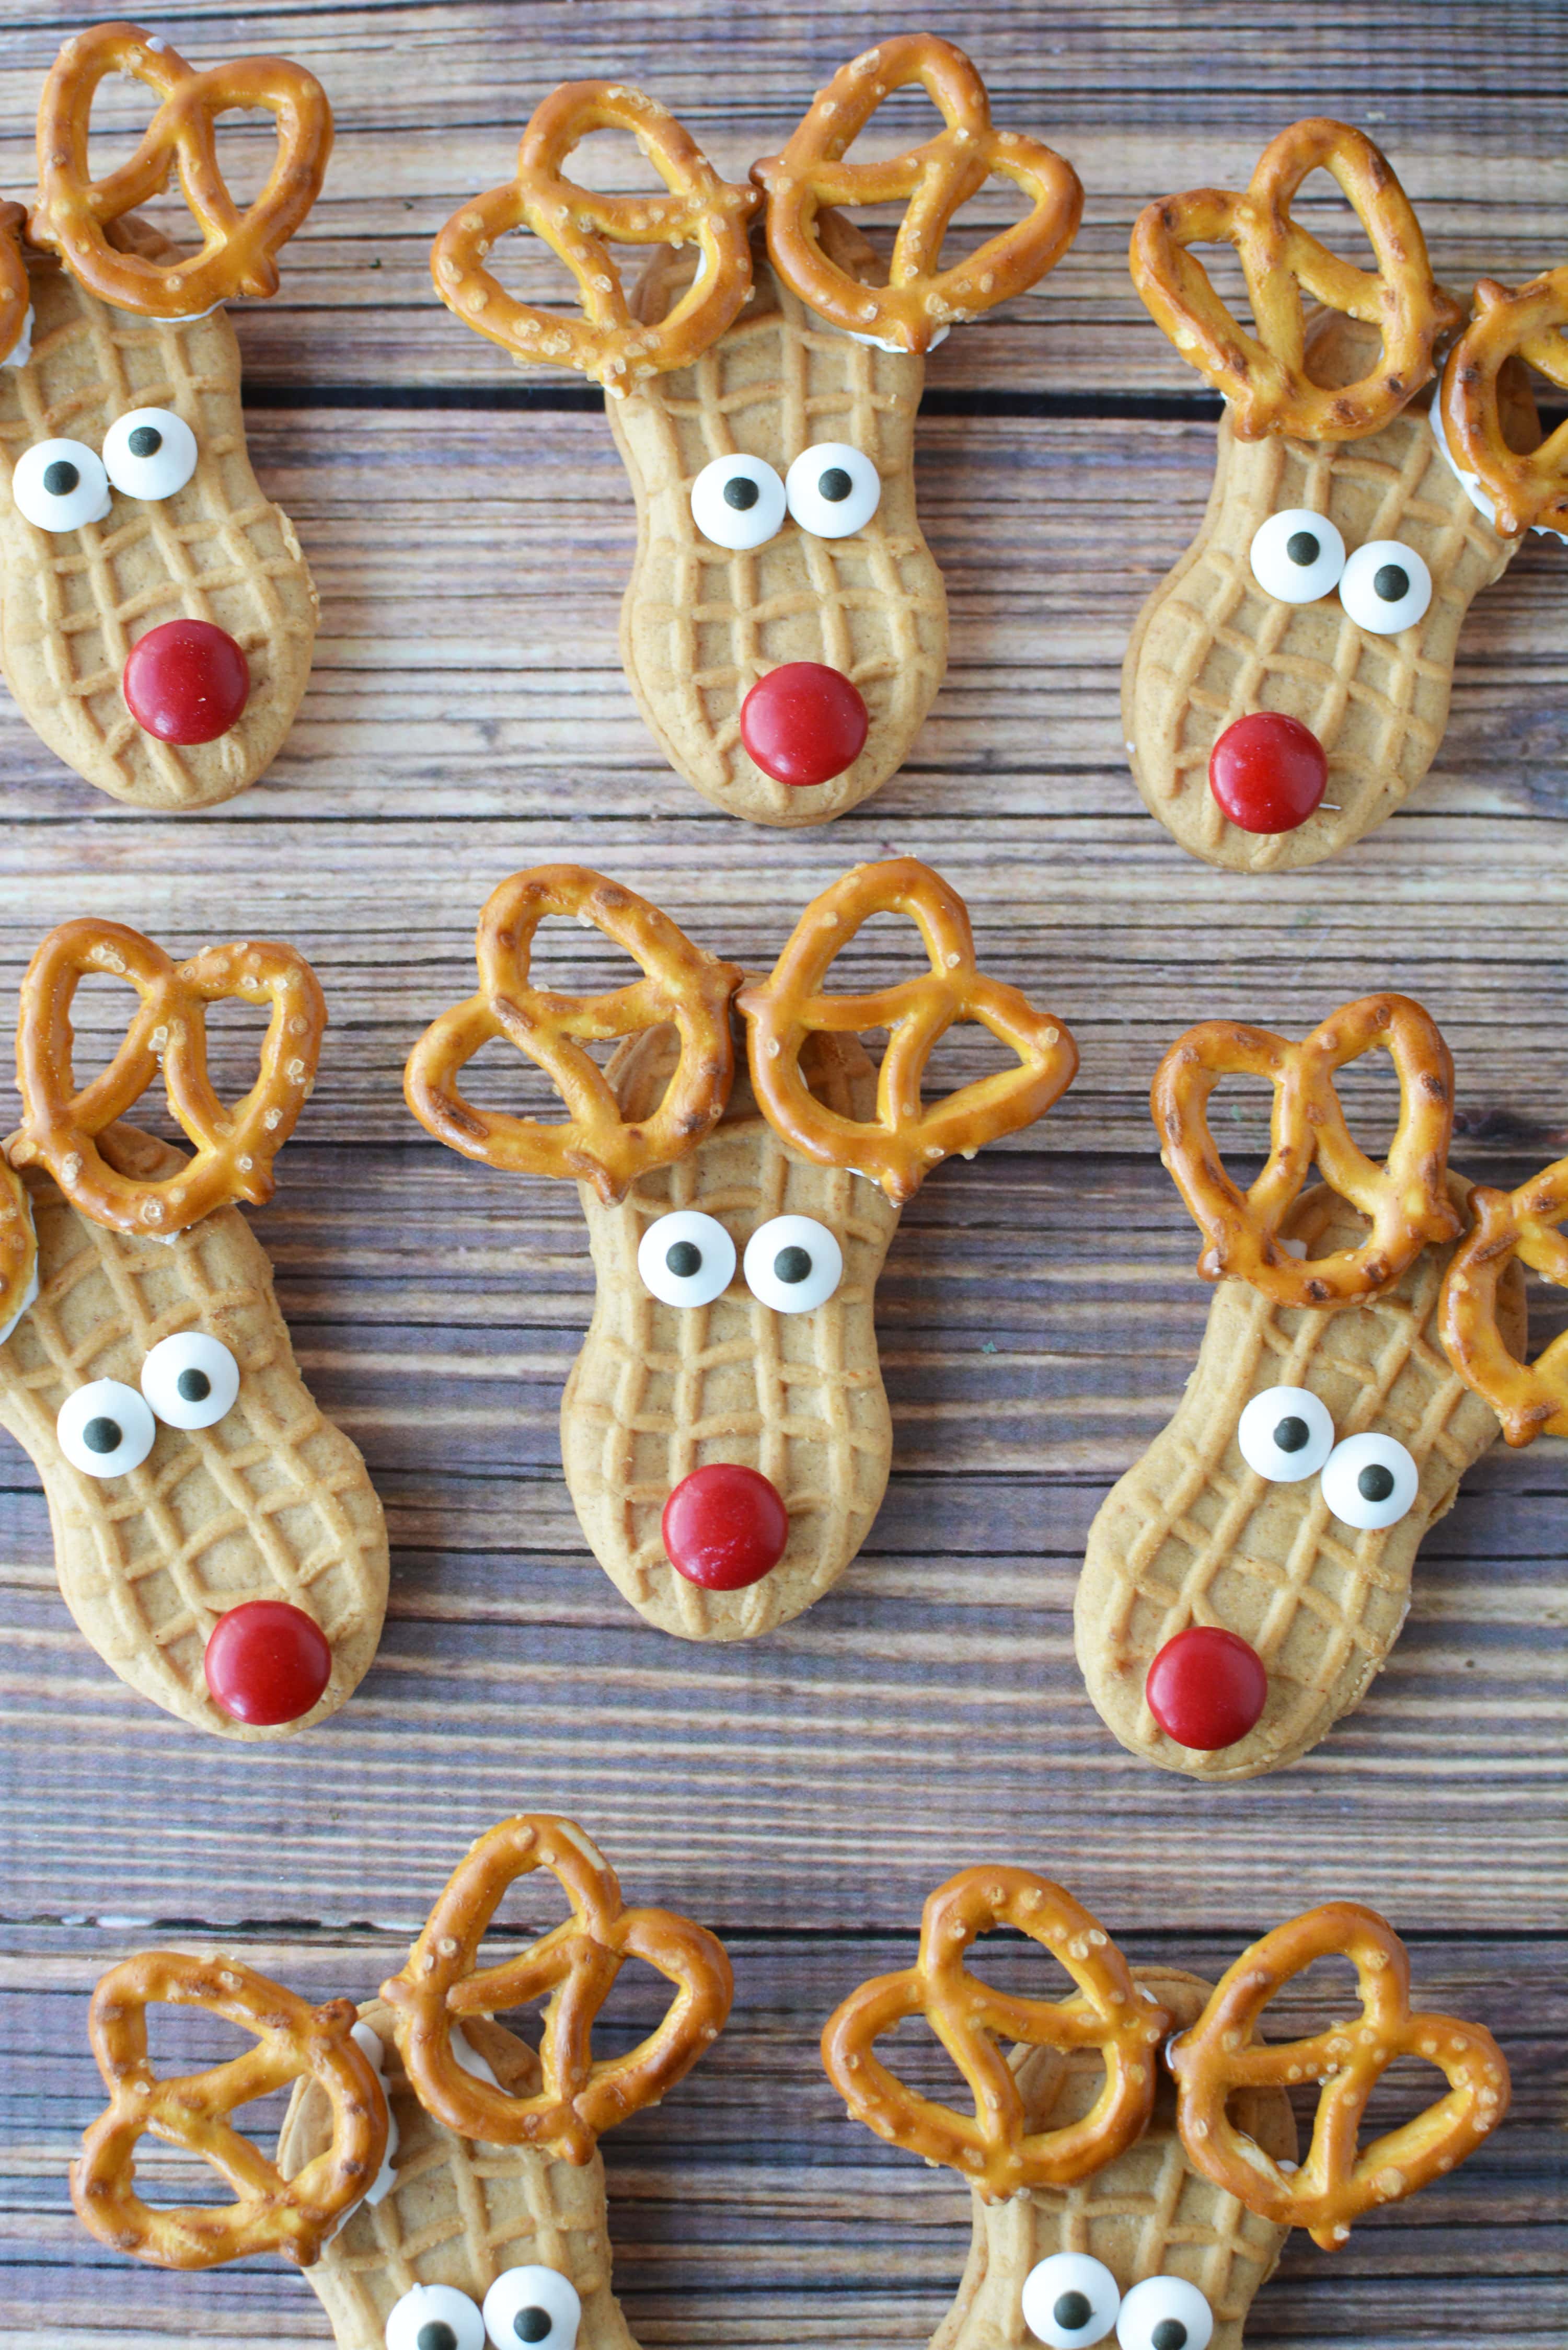 no-bake-nutter-butter-reindeer-cookies-so-cute-thrifty-nw-mom